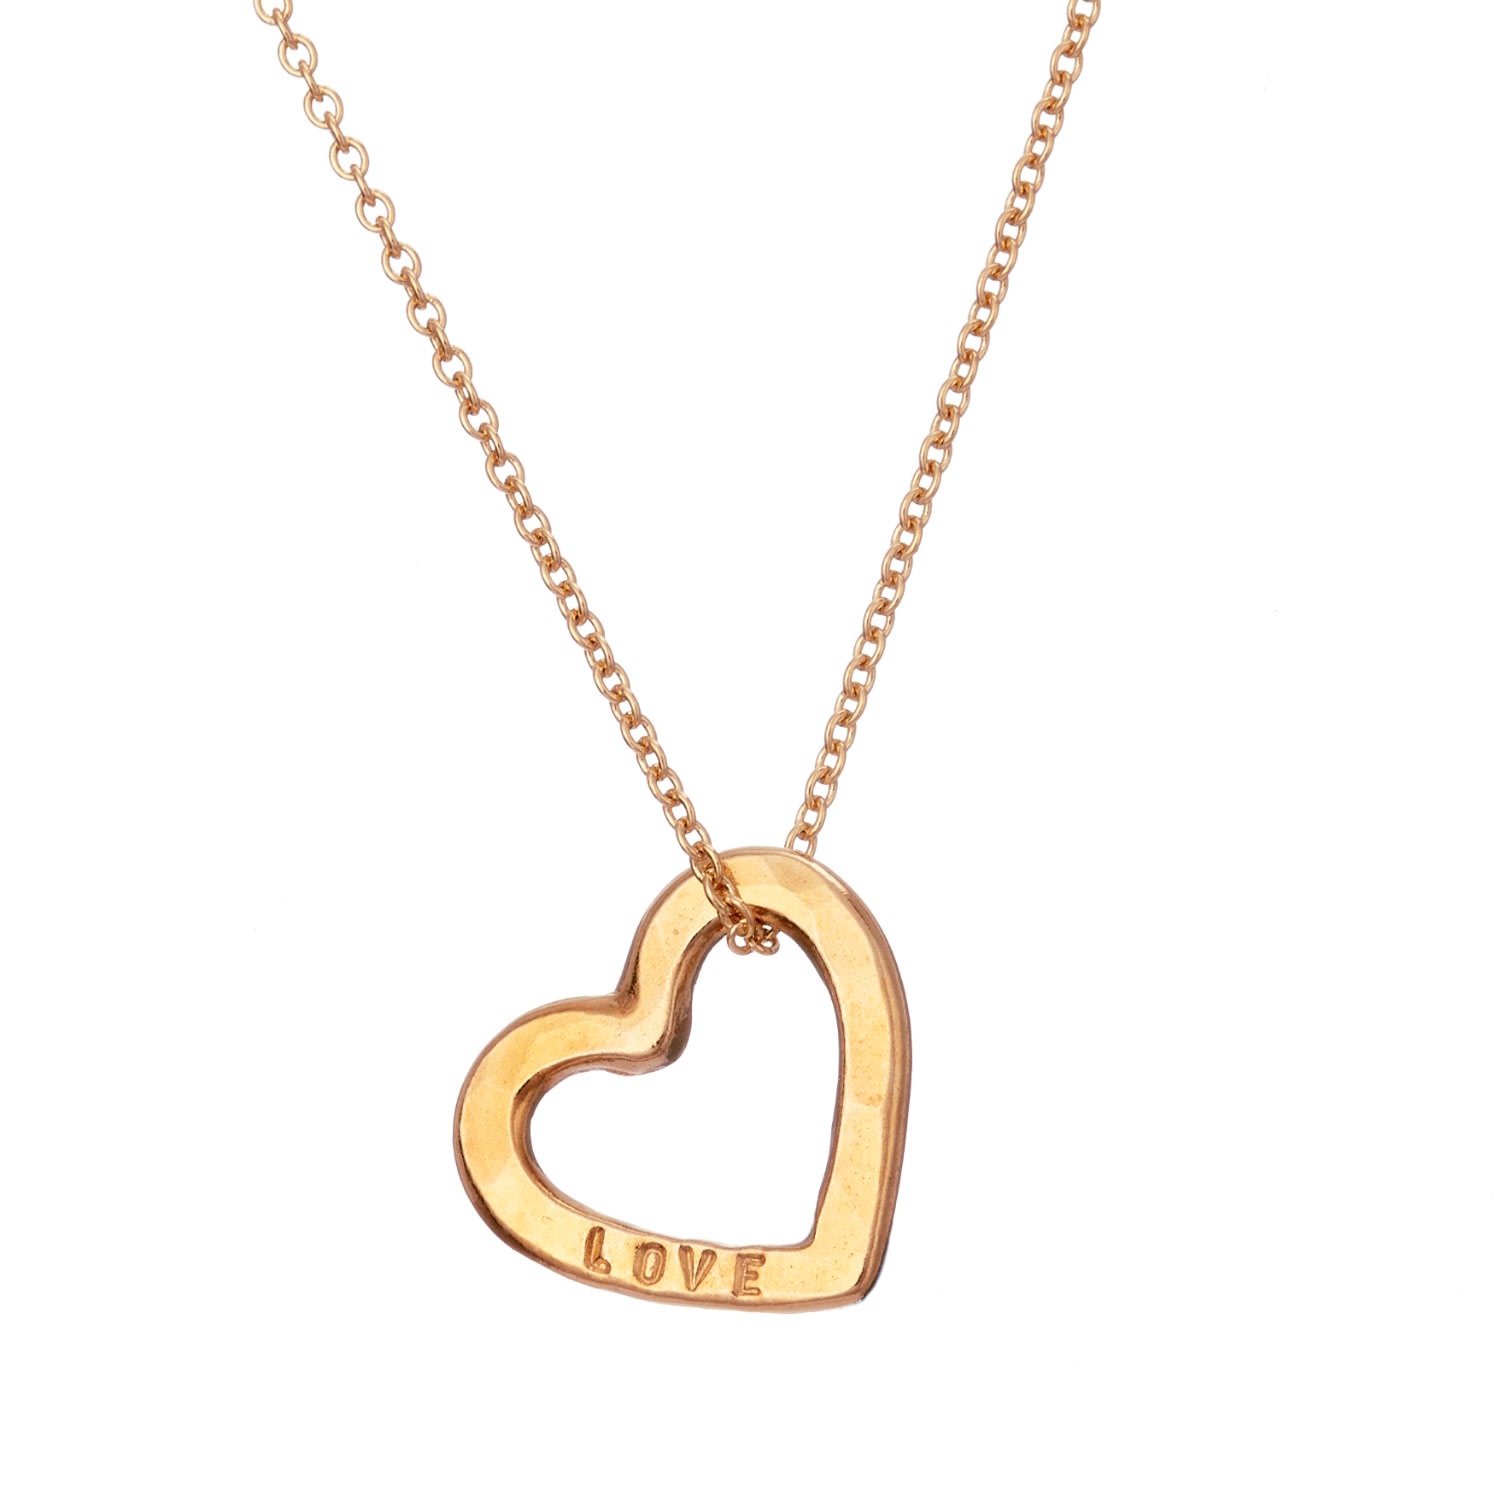 Women’s Yellow Gold Plated ’Love’ Mini Heart Necklace Posh Totty Designs